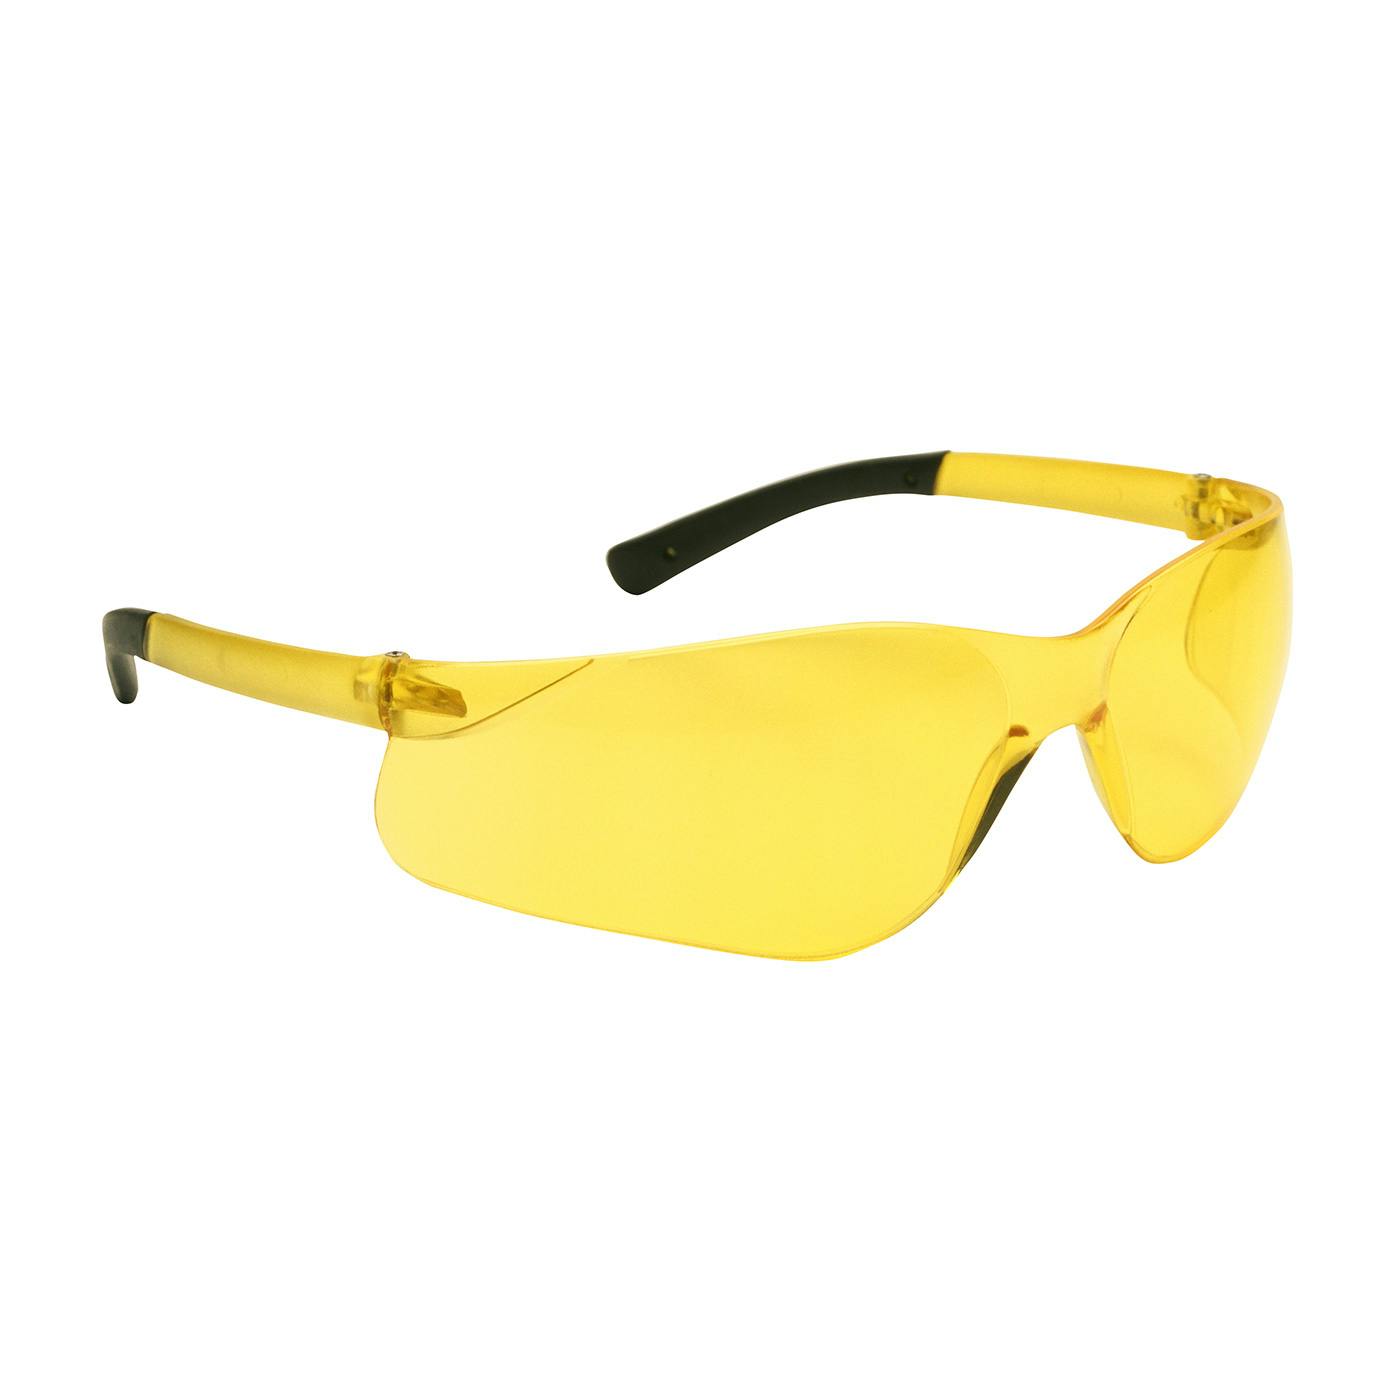 Rimless Safety Glasses with Amber Temple, Amber Lens and Anti-Scratch Coating, Amber (250-06-5509) - OS_0